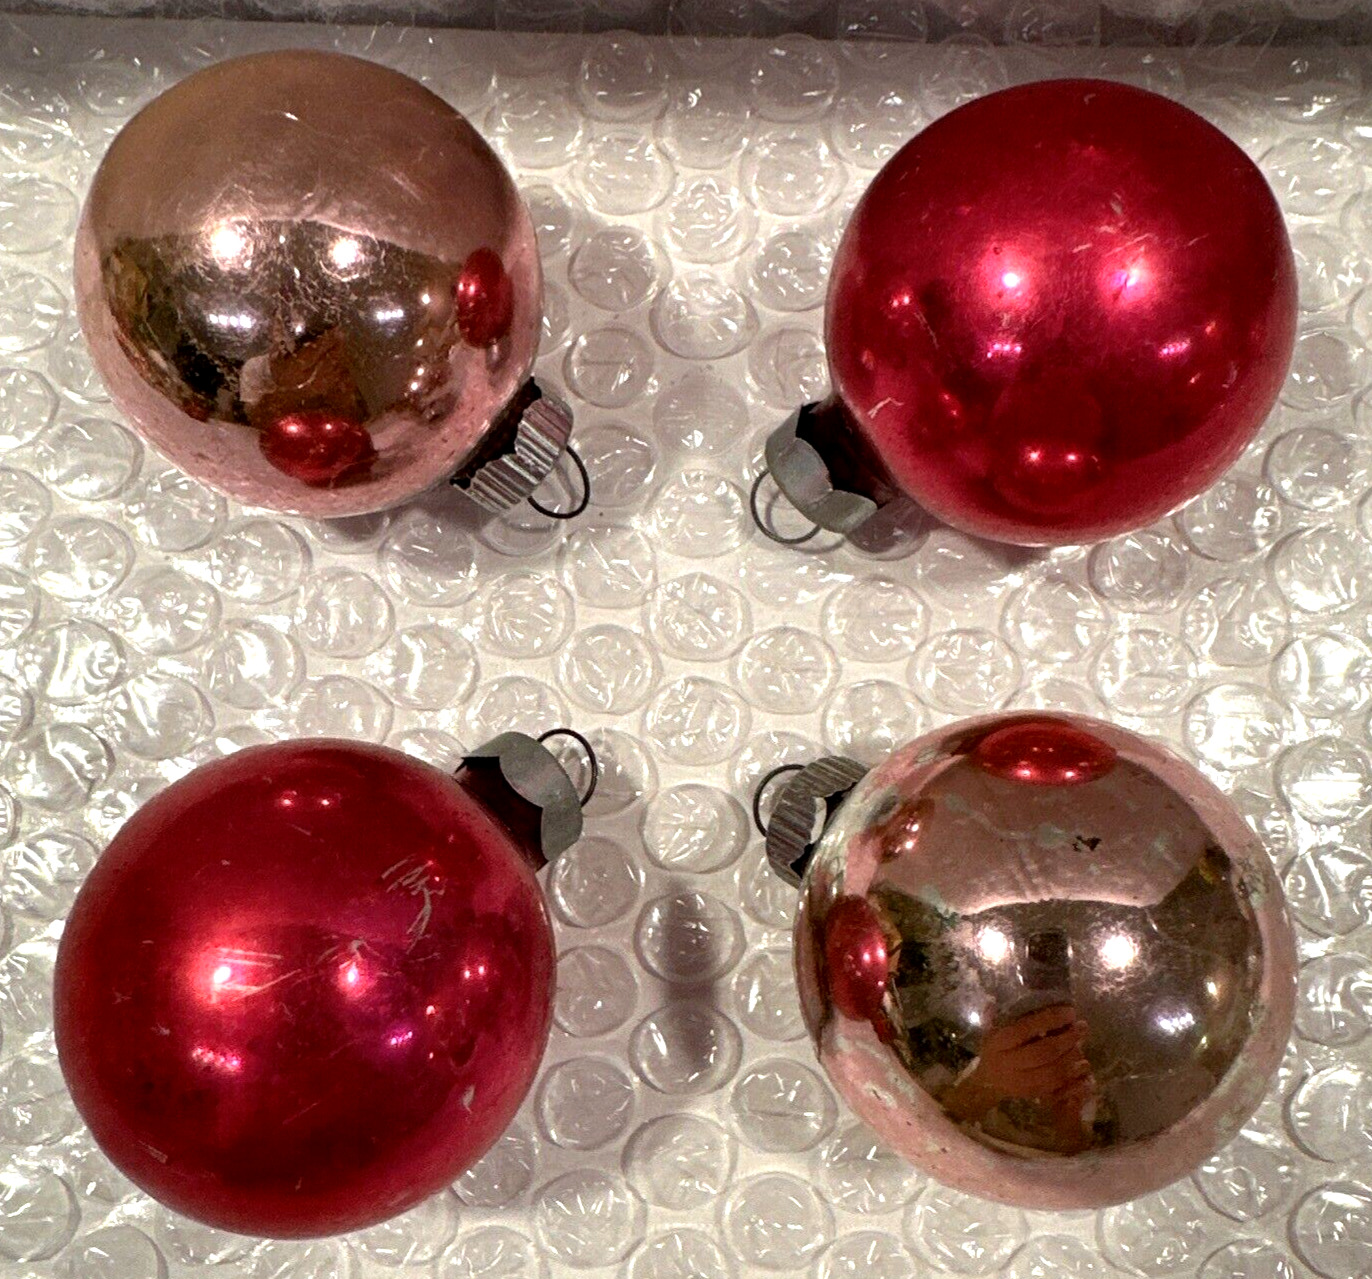 4 Vintage 1960s Mercury Glass 2 Red 2 Pink Shiny Brite Christmas Ornaments 1.75”